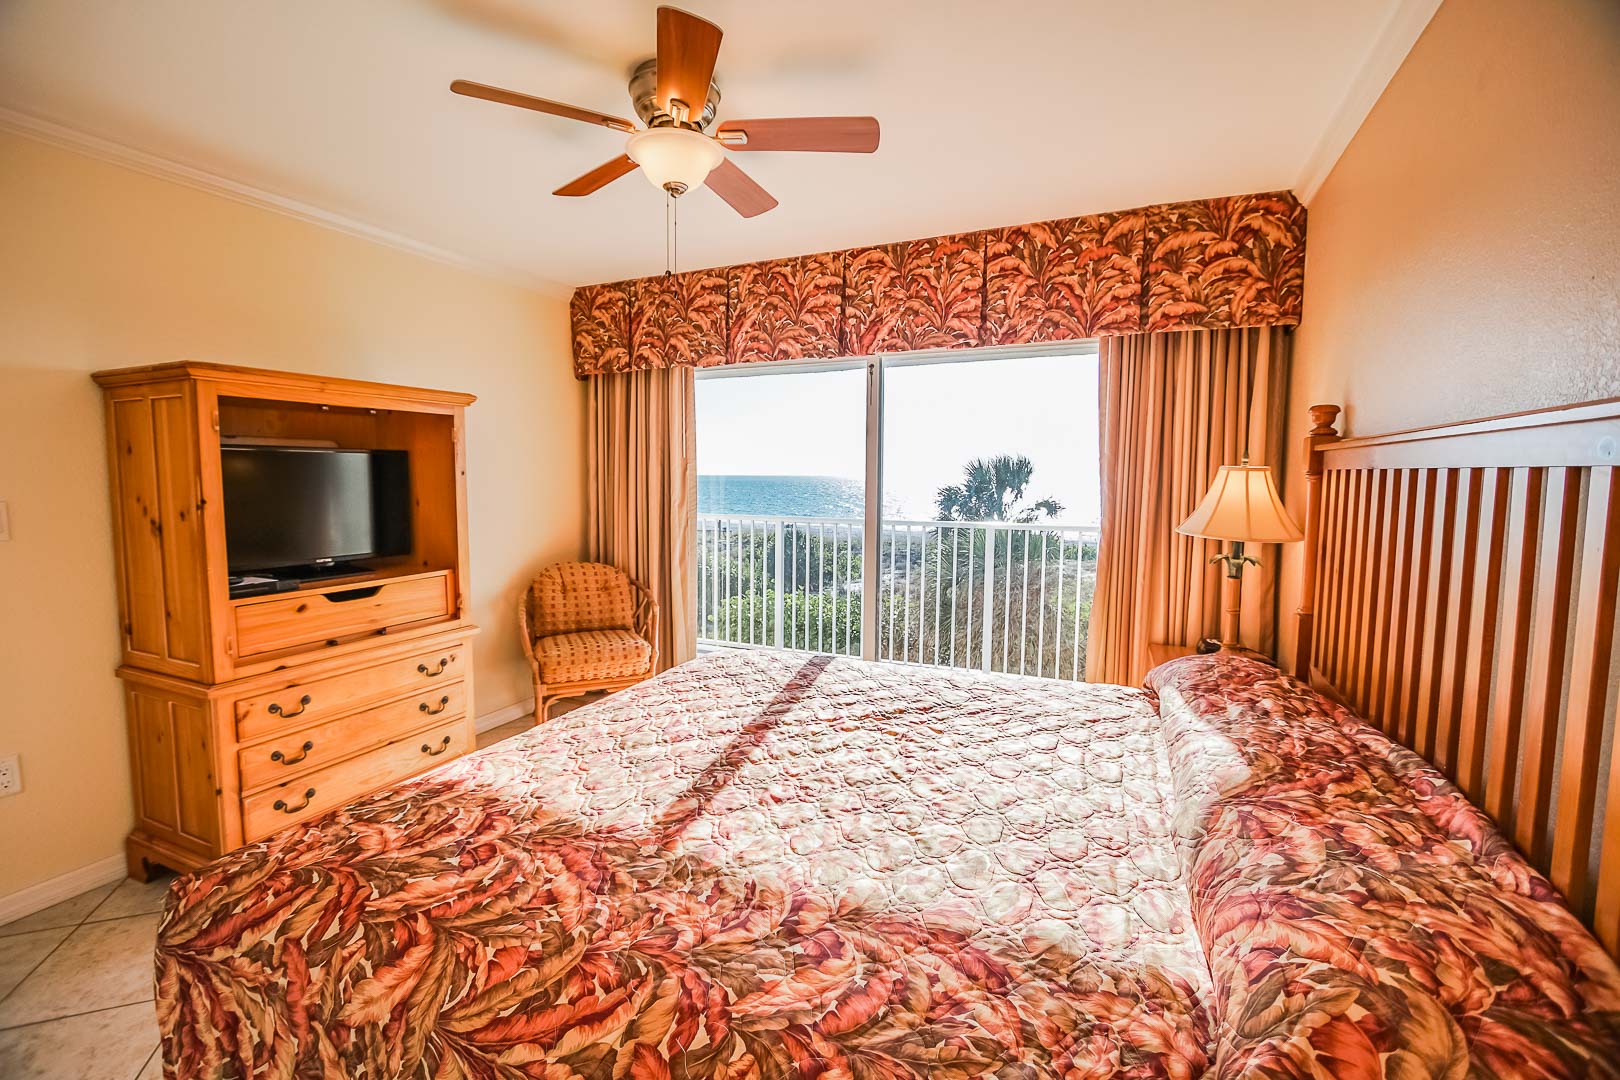 A vibrant bedroom with a balcony view at VRI's Sand Pebble Resort in Treasure Island, Florida.